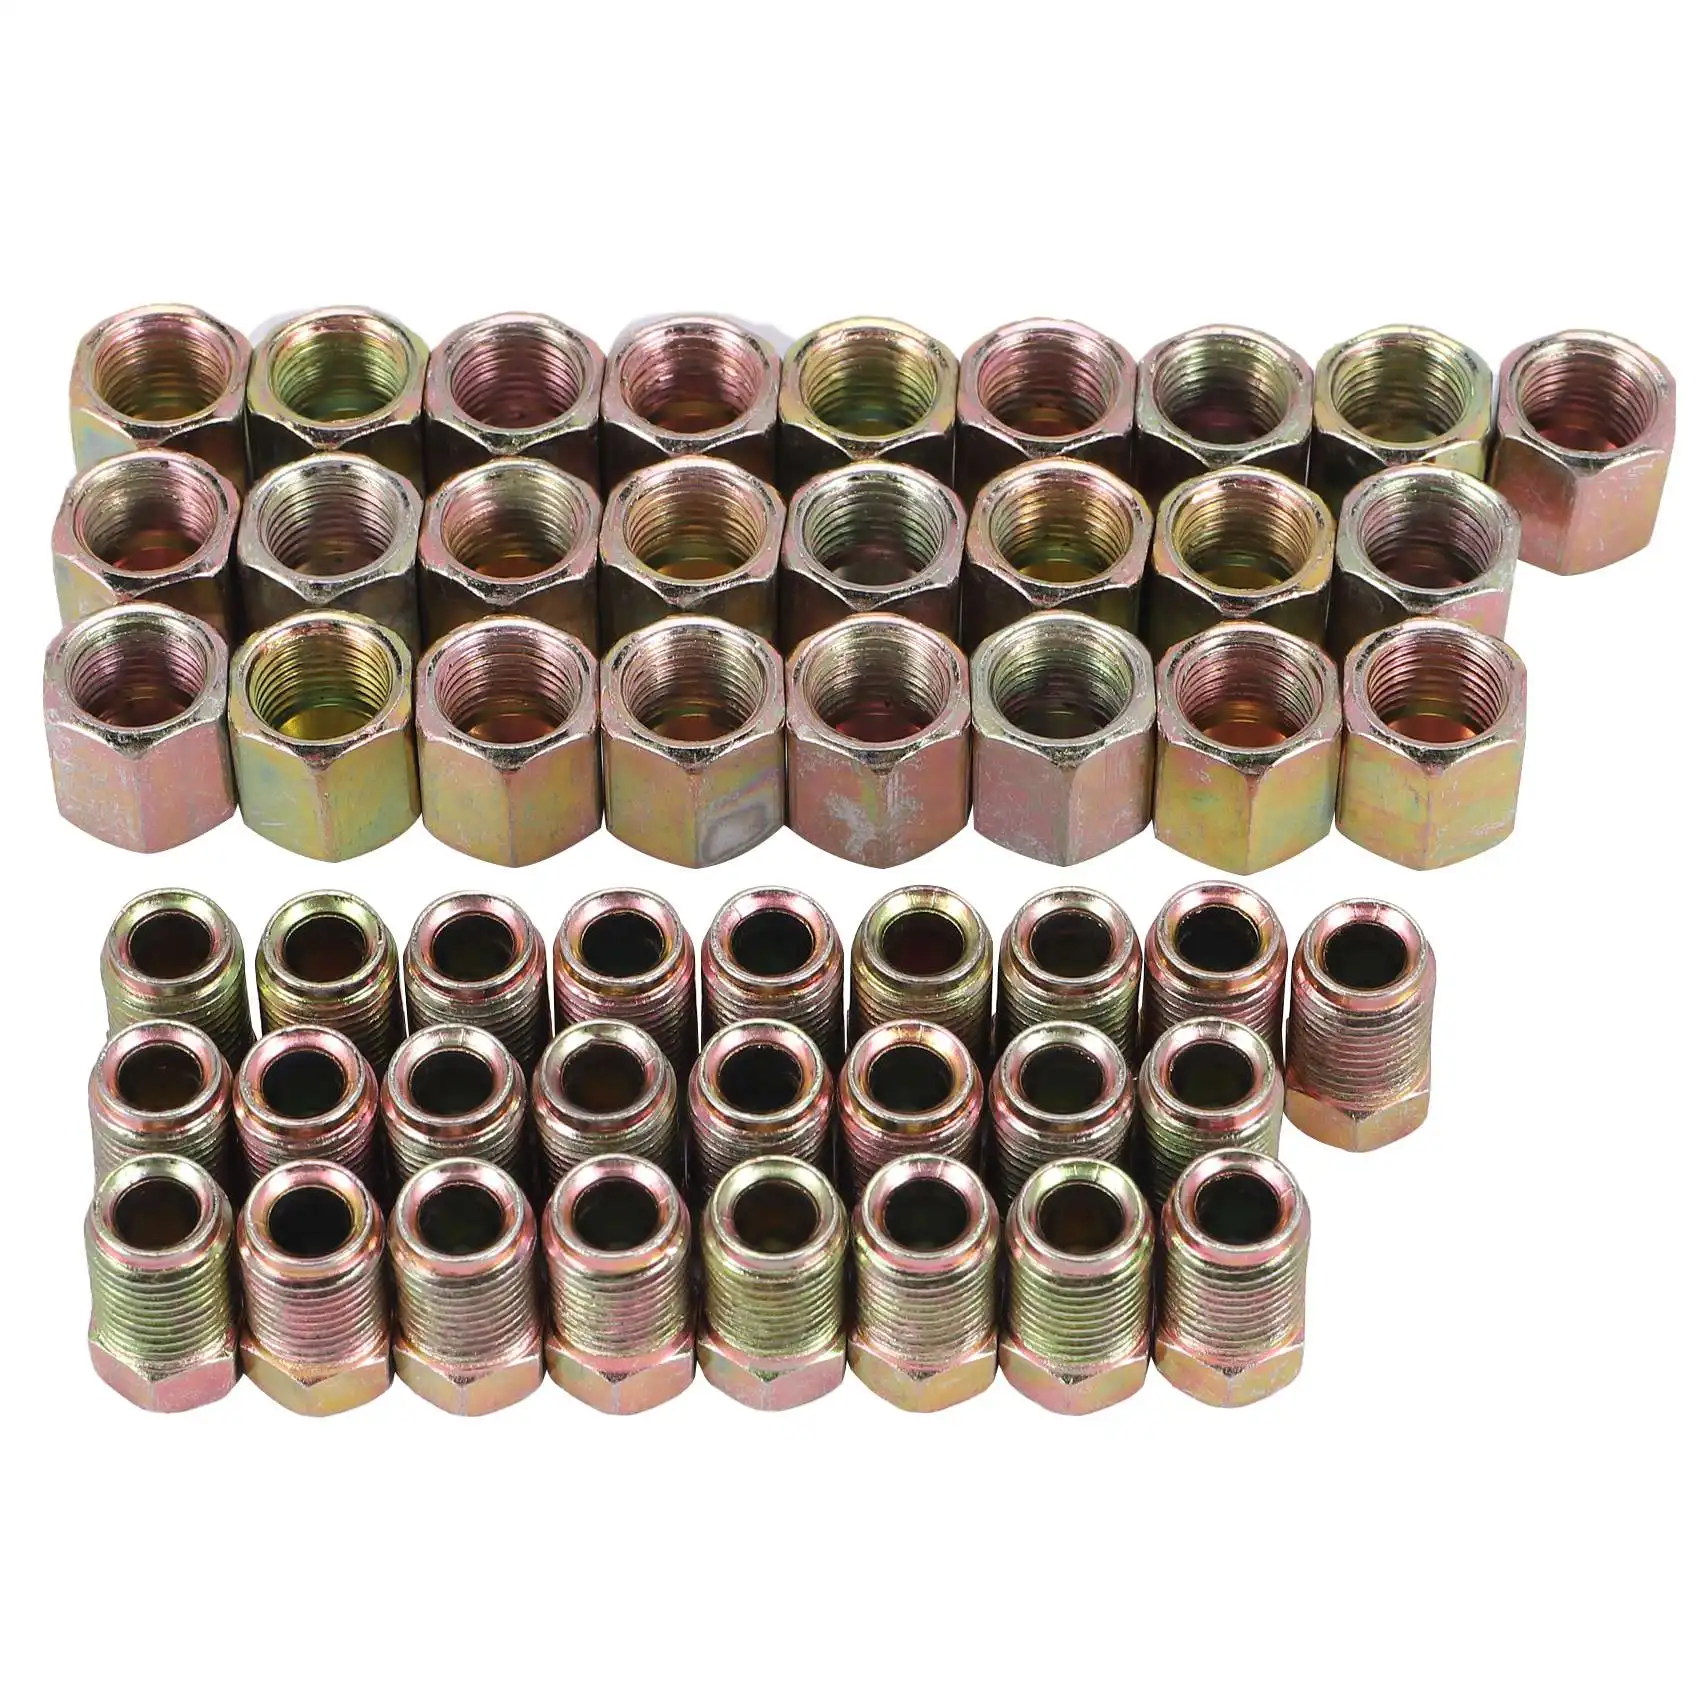 

50Pcs Male / Female End Union Brake Pipe Screw Nuts M10 x 1mm 3/16Inch OD Copper Brake Tubes Line Pipe Fittings Metric